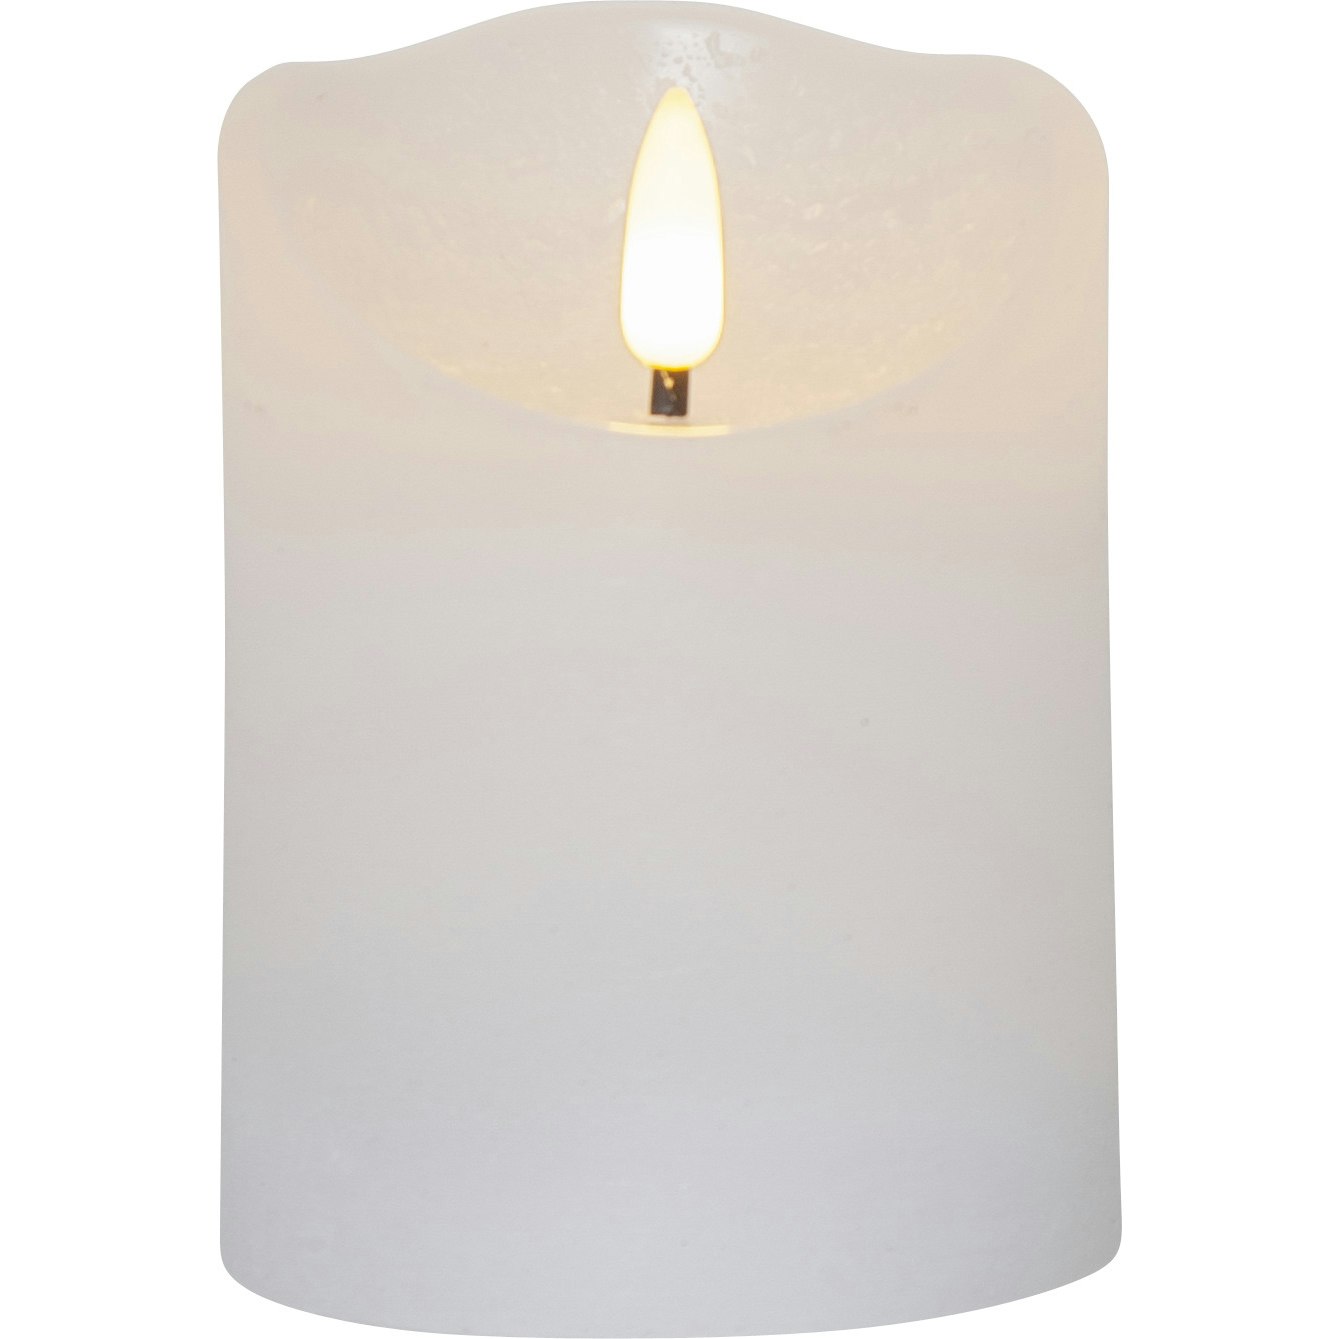 Flamme Rustic LED Pillar Candle White, 10 cm